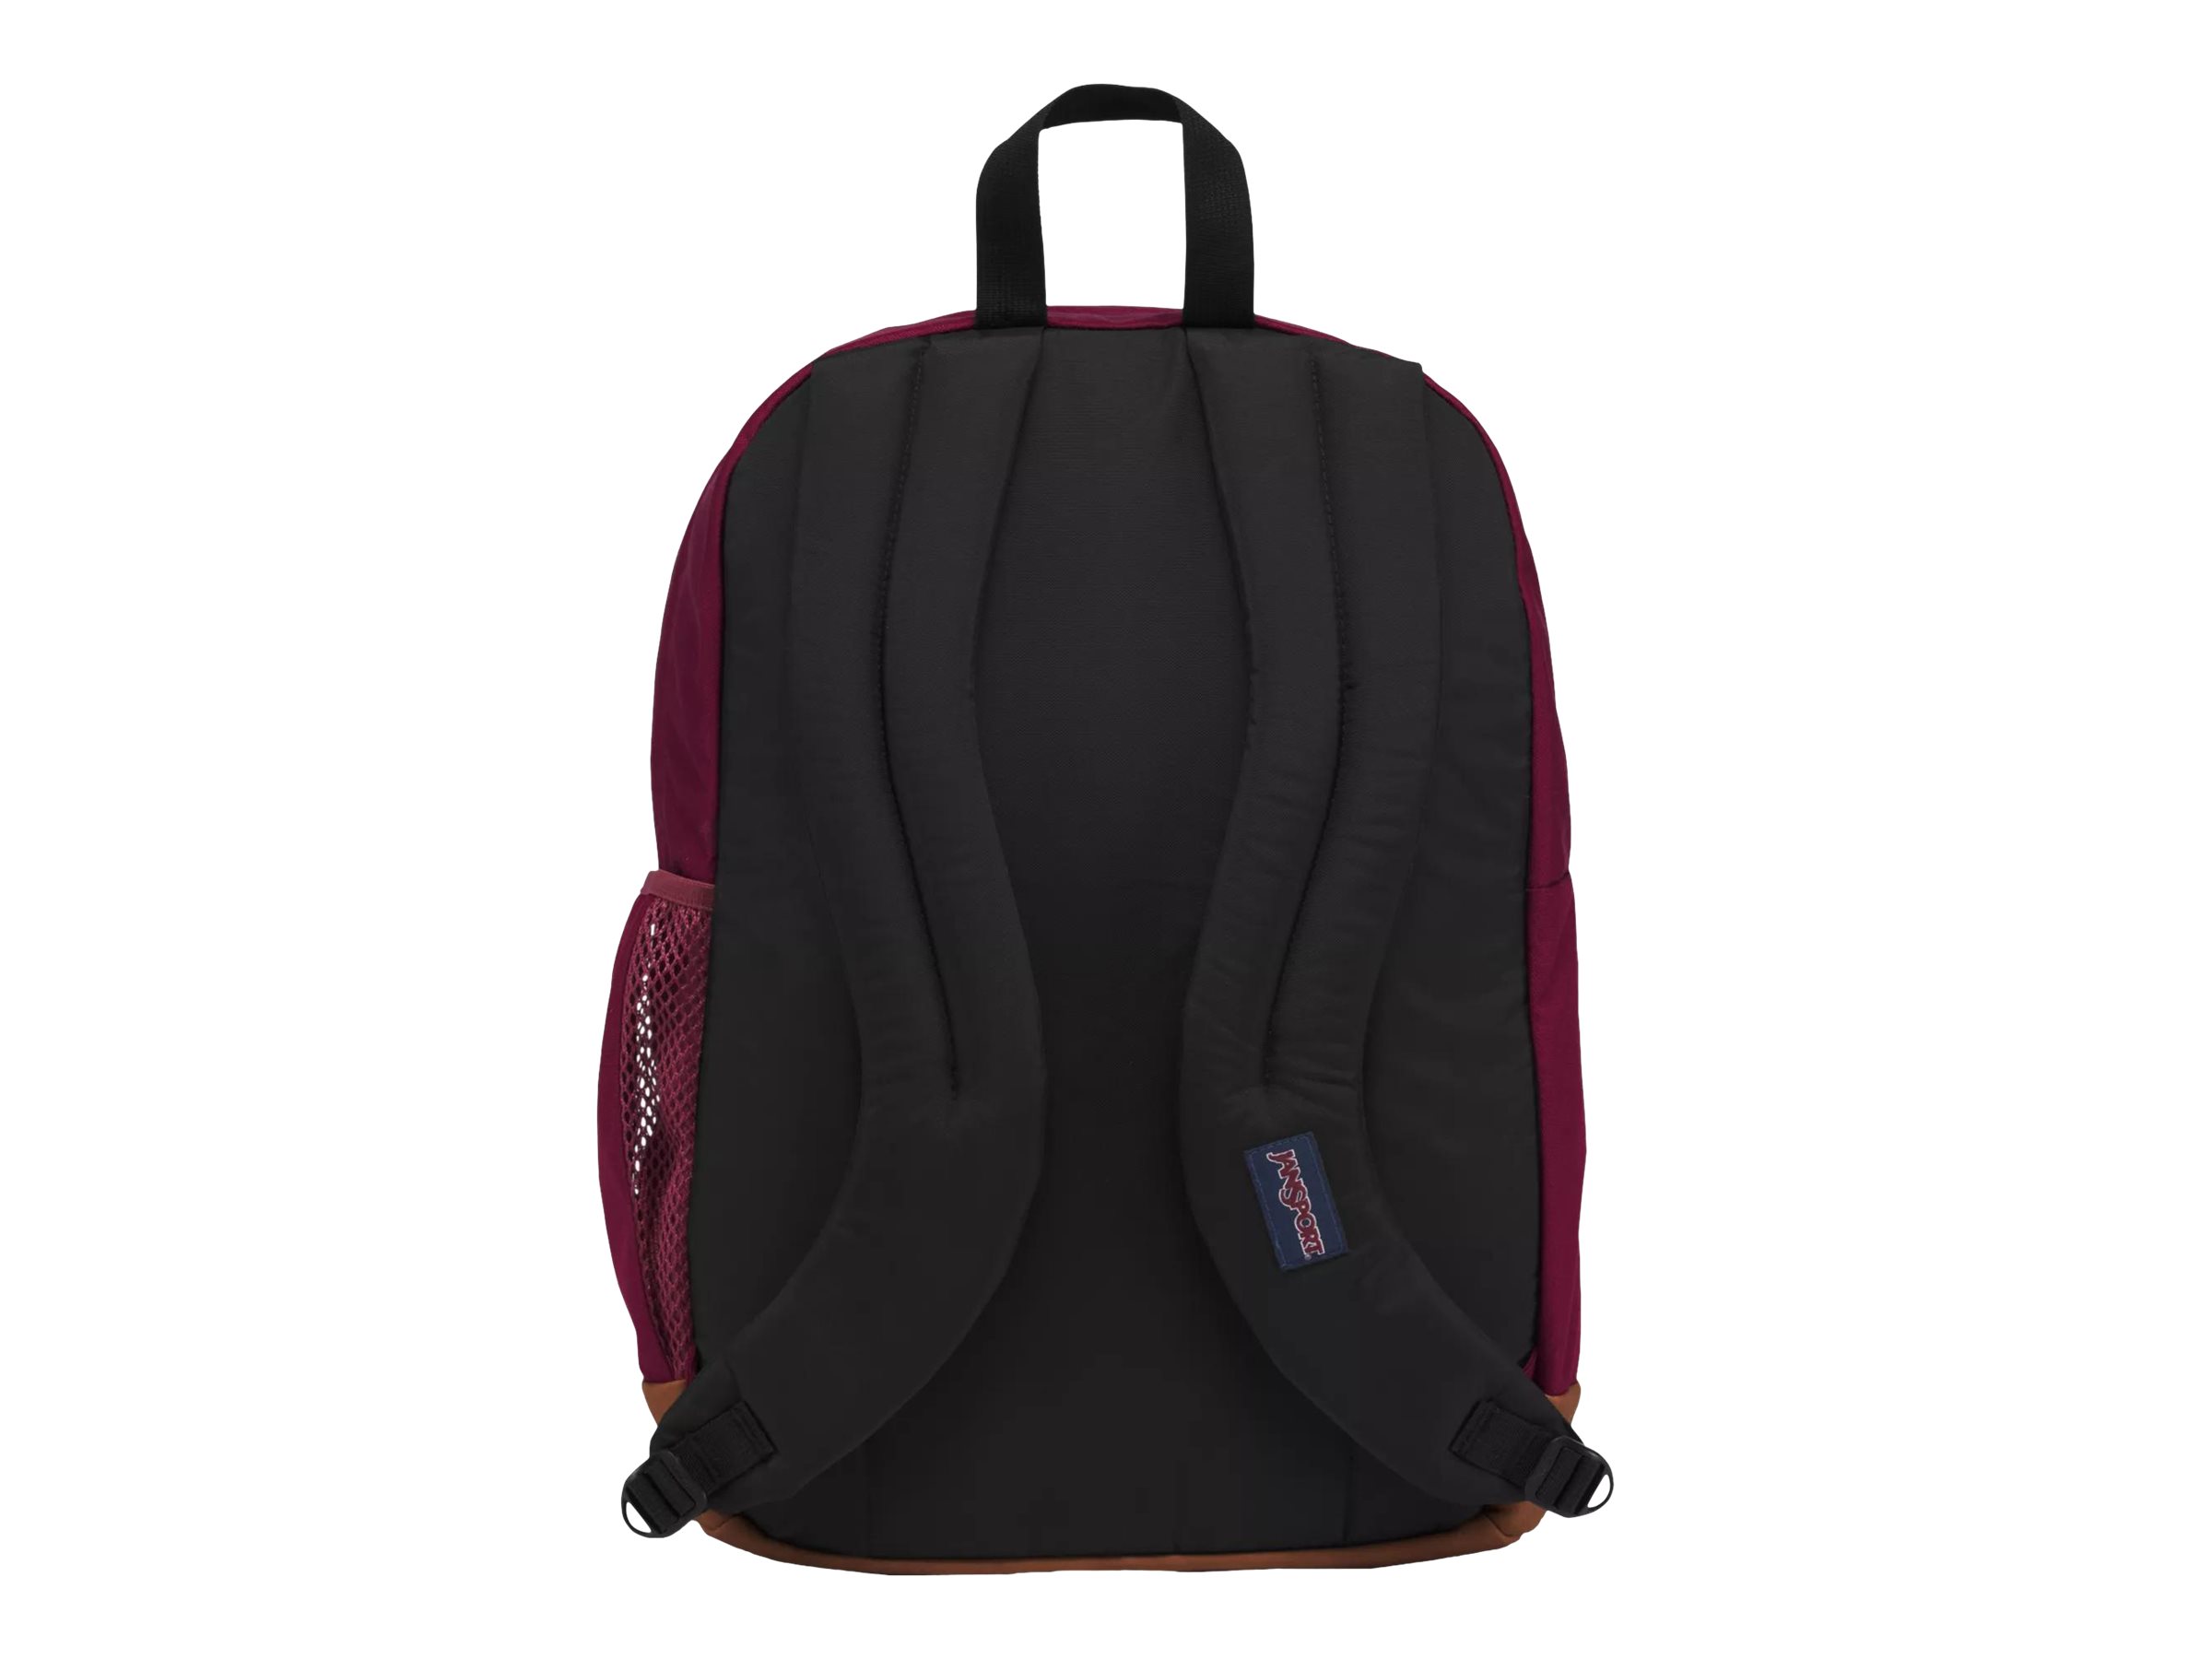 JanSport Cool Student - Notebook carrying backpack - 15" - russet red - image 2 of 4